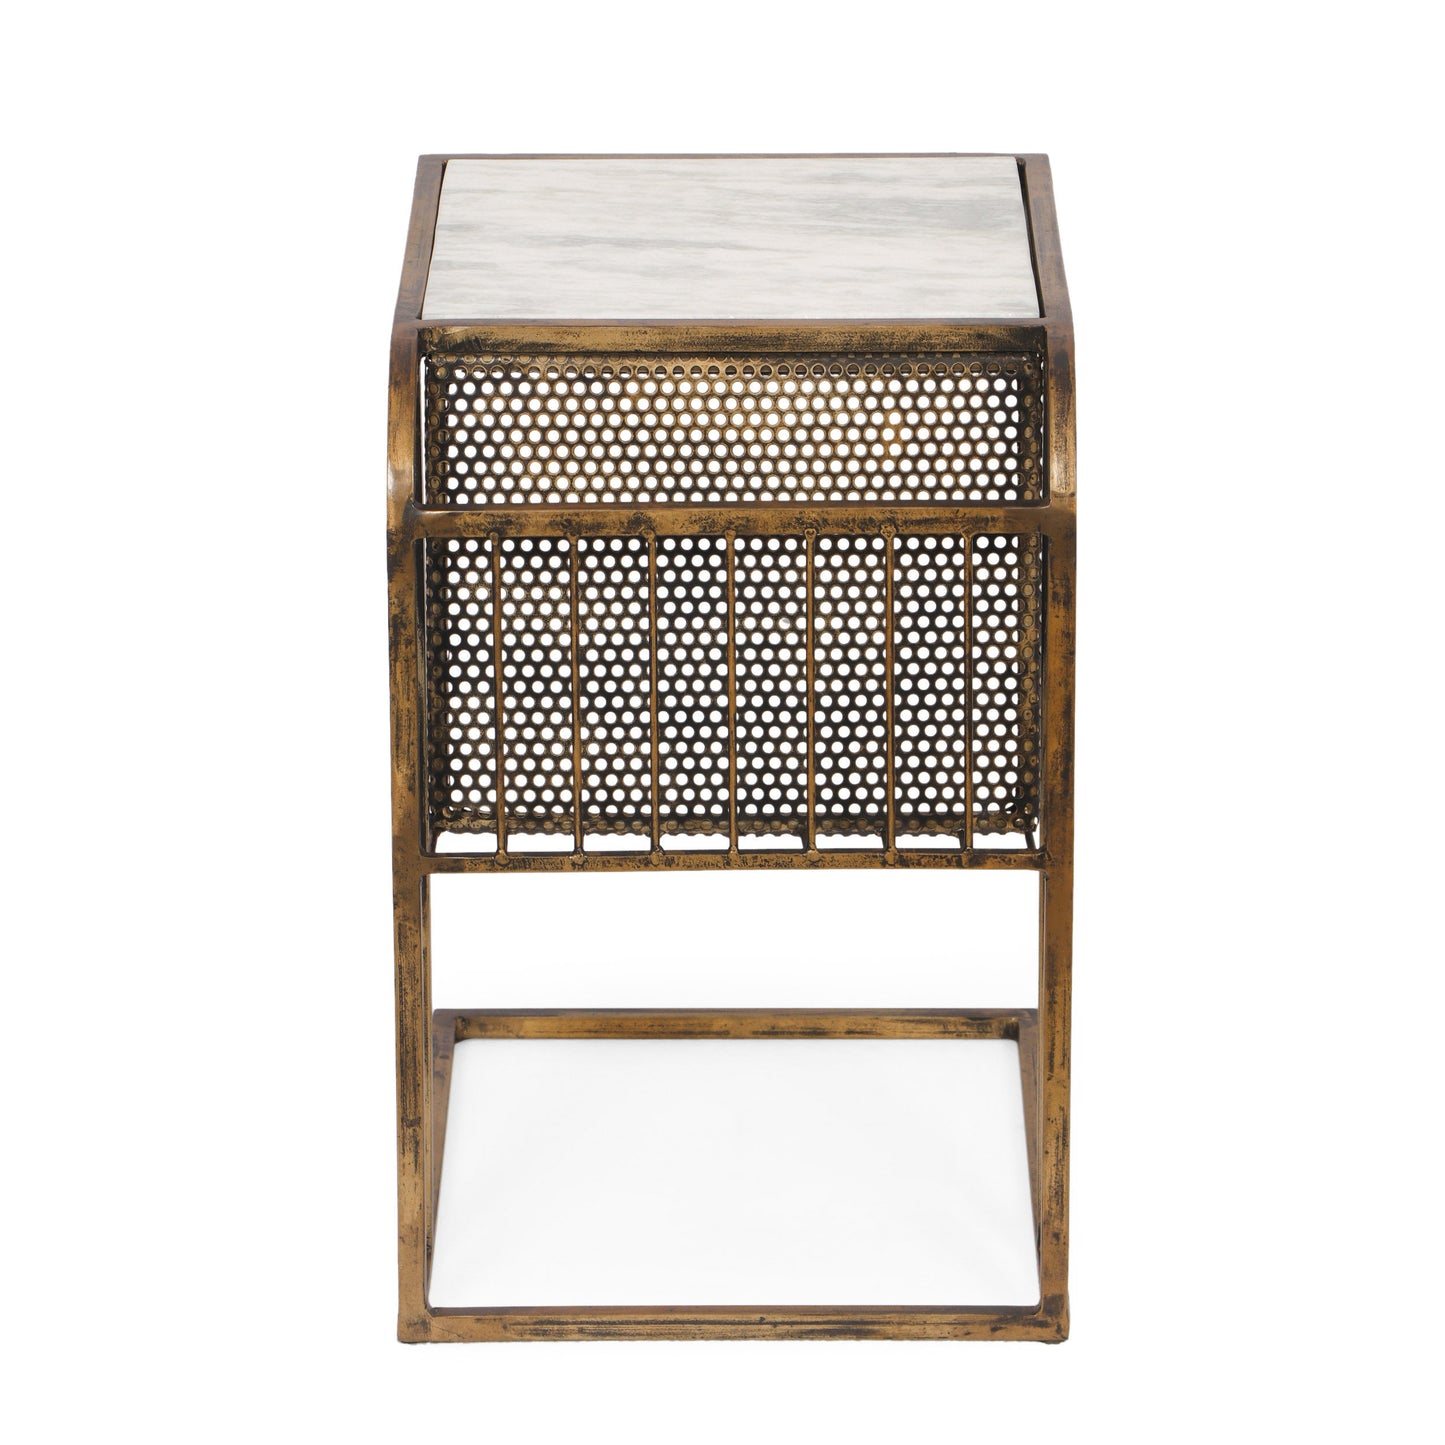 Billman Boho Glam Handcrafted Marble Top C-Shaped Side Table with Magazine Rack, Natural White and Antique Brass